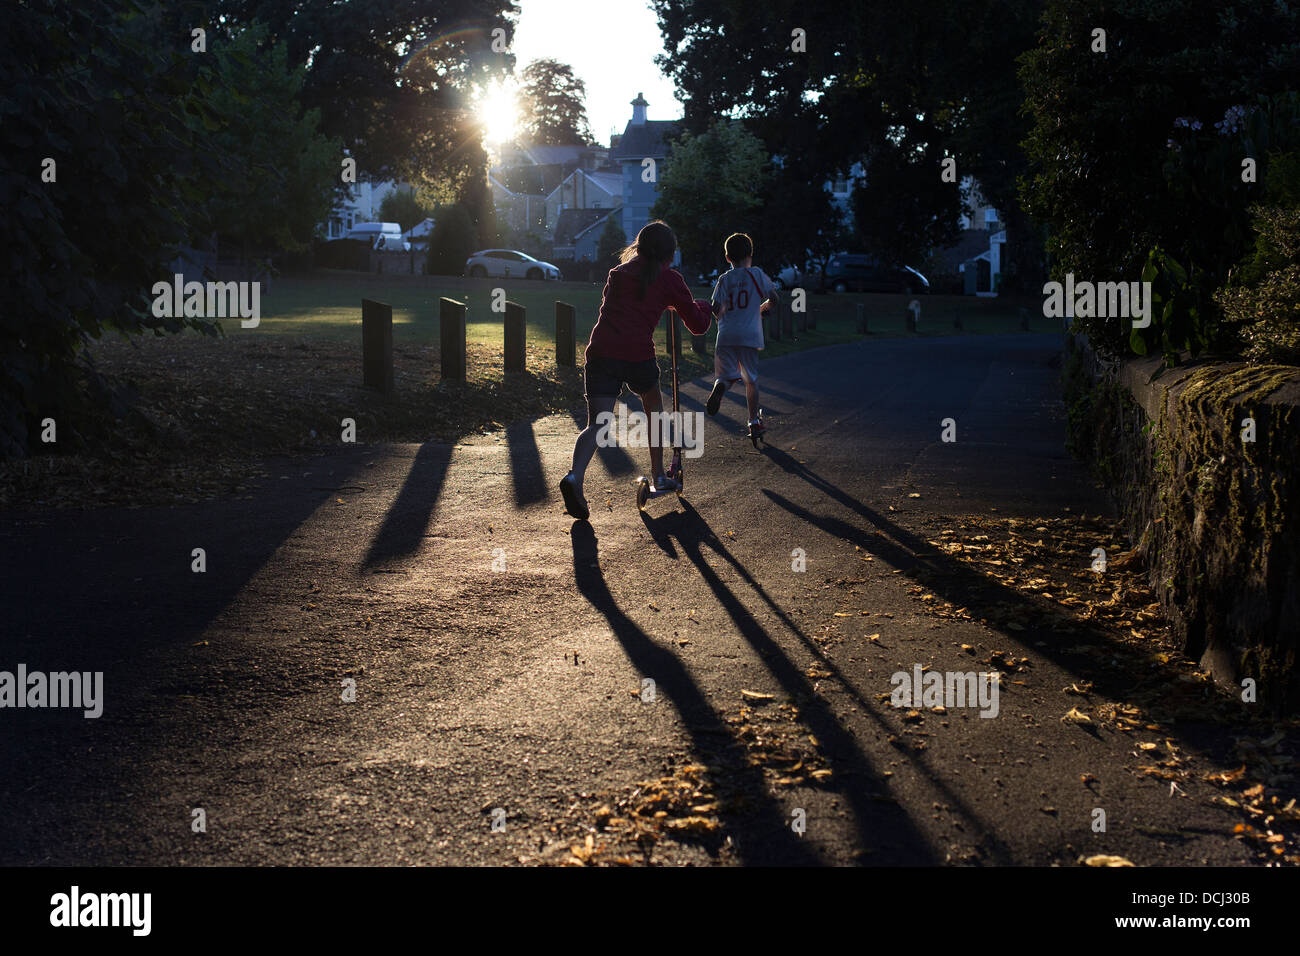 children on scooters, active, activity, background, balance, child, culture, equipment, fun, game, girl, isolated, leisure, Stock Photo